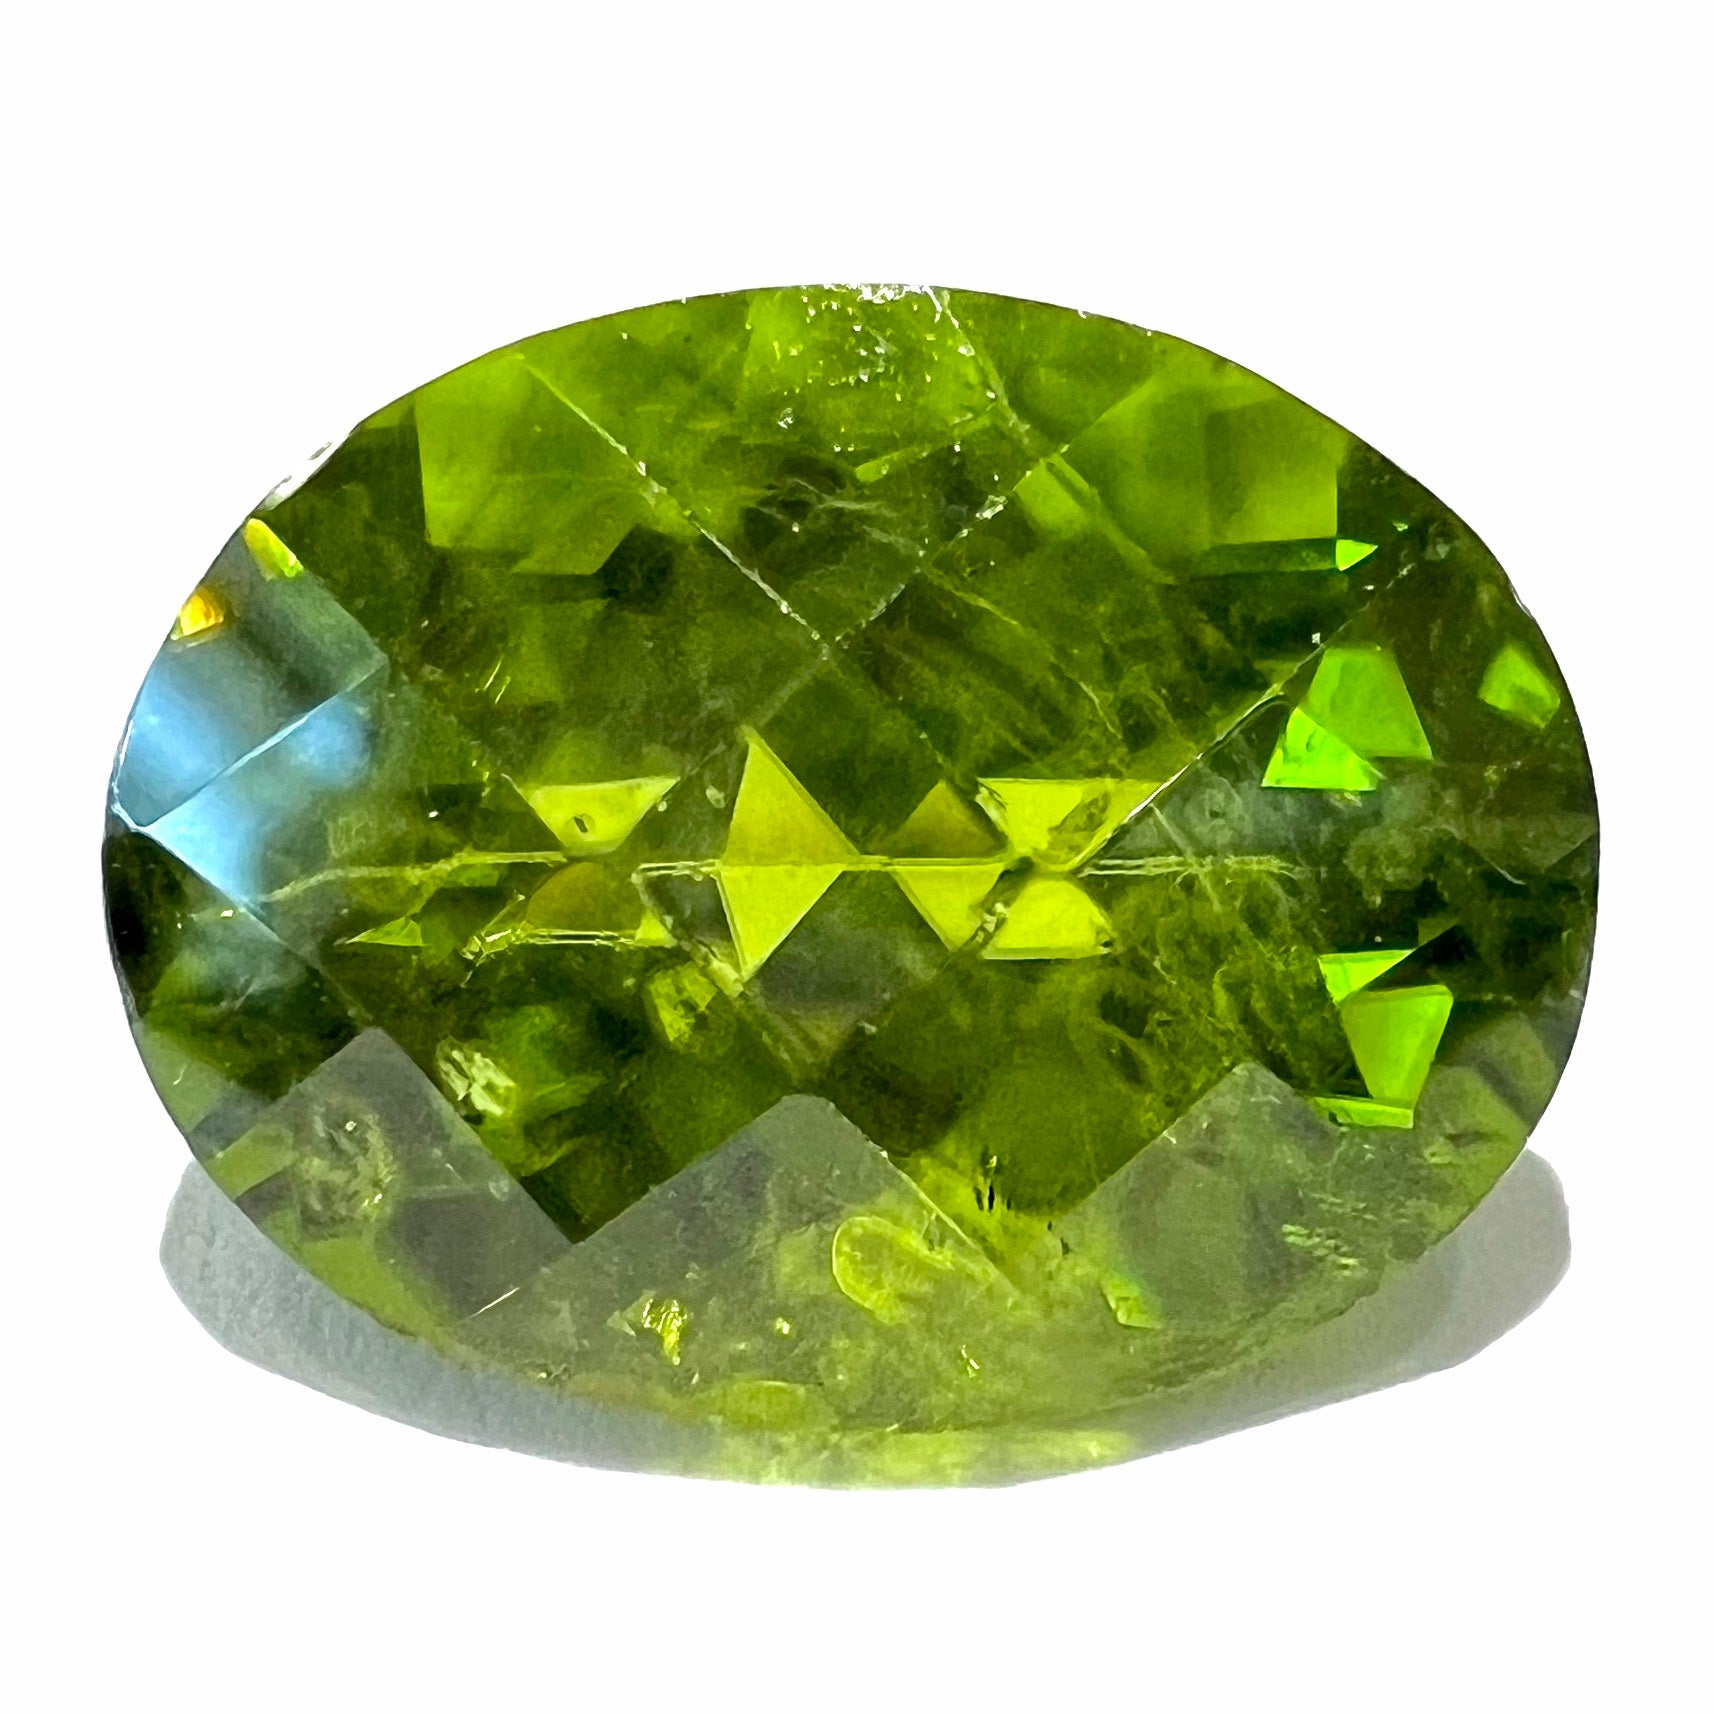 A loose, faceted oval checkerboard cut peridot gemstone from Pakistan.  The stone weighs 17.04 carats.